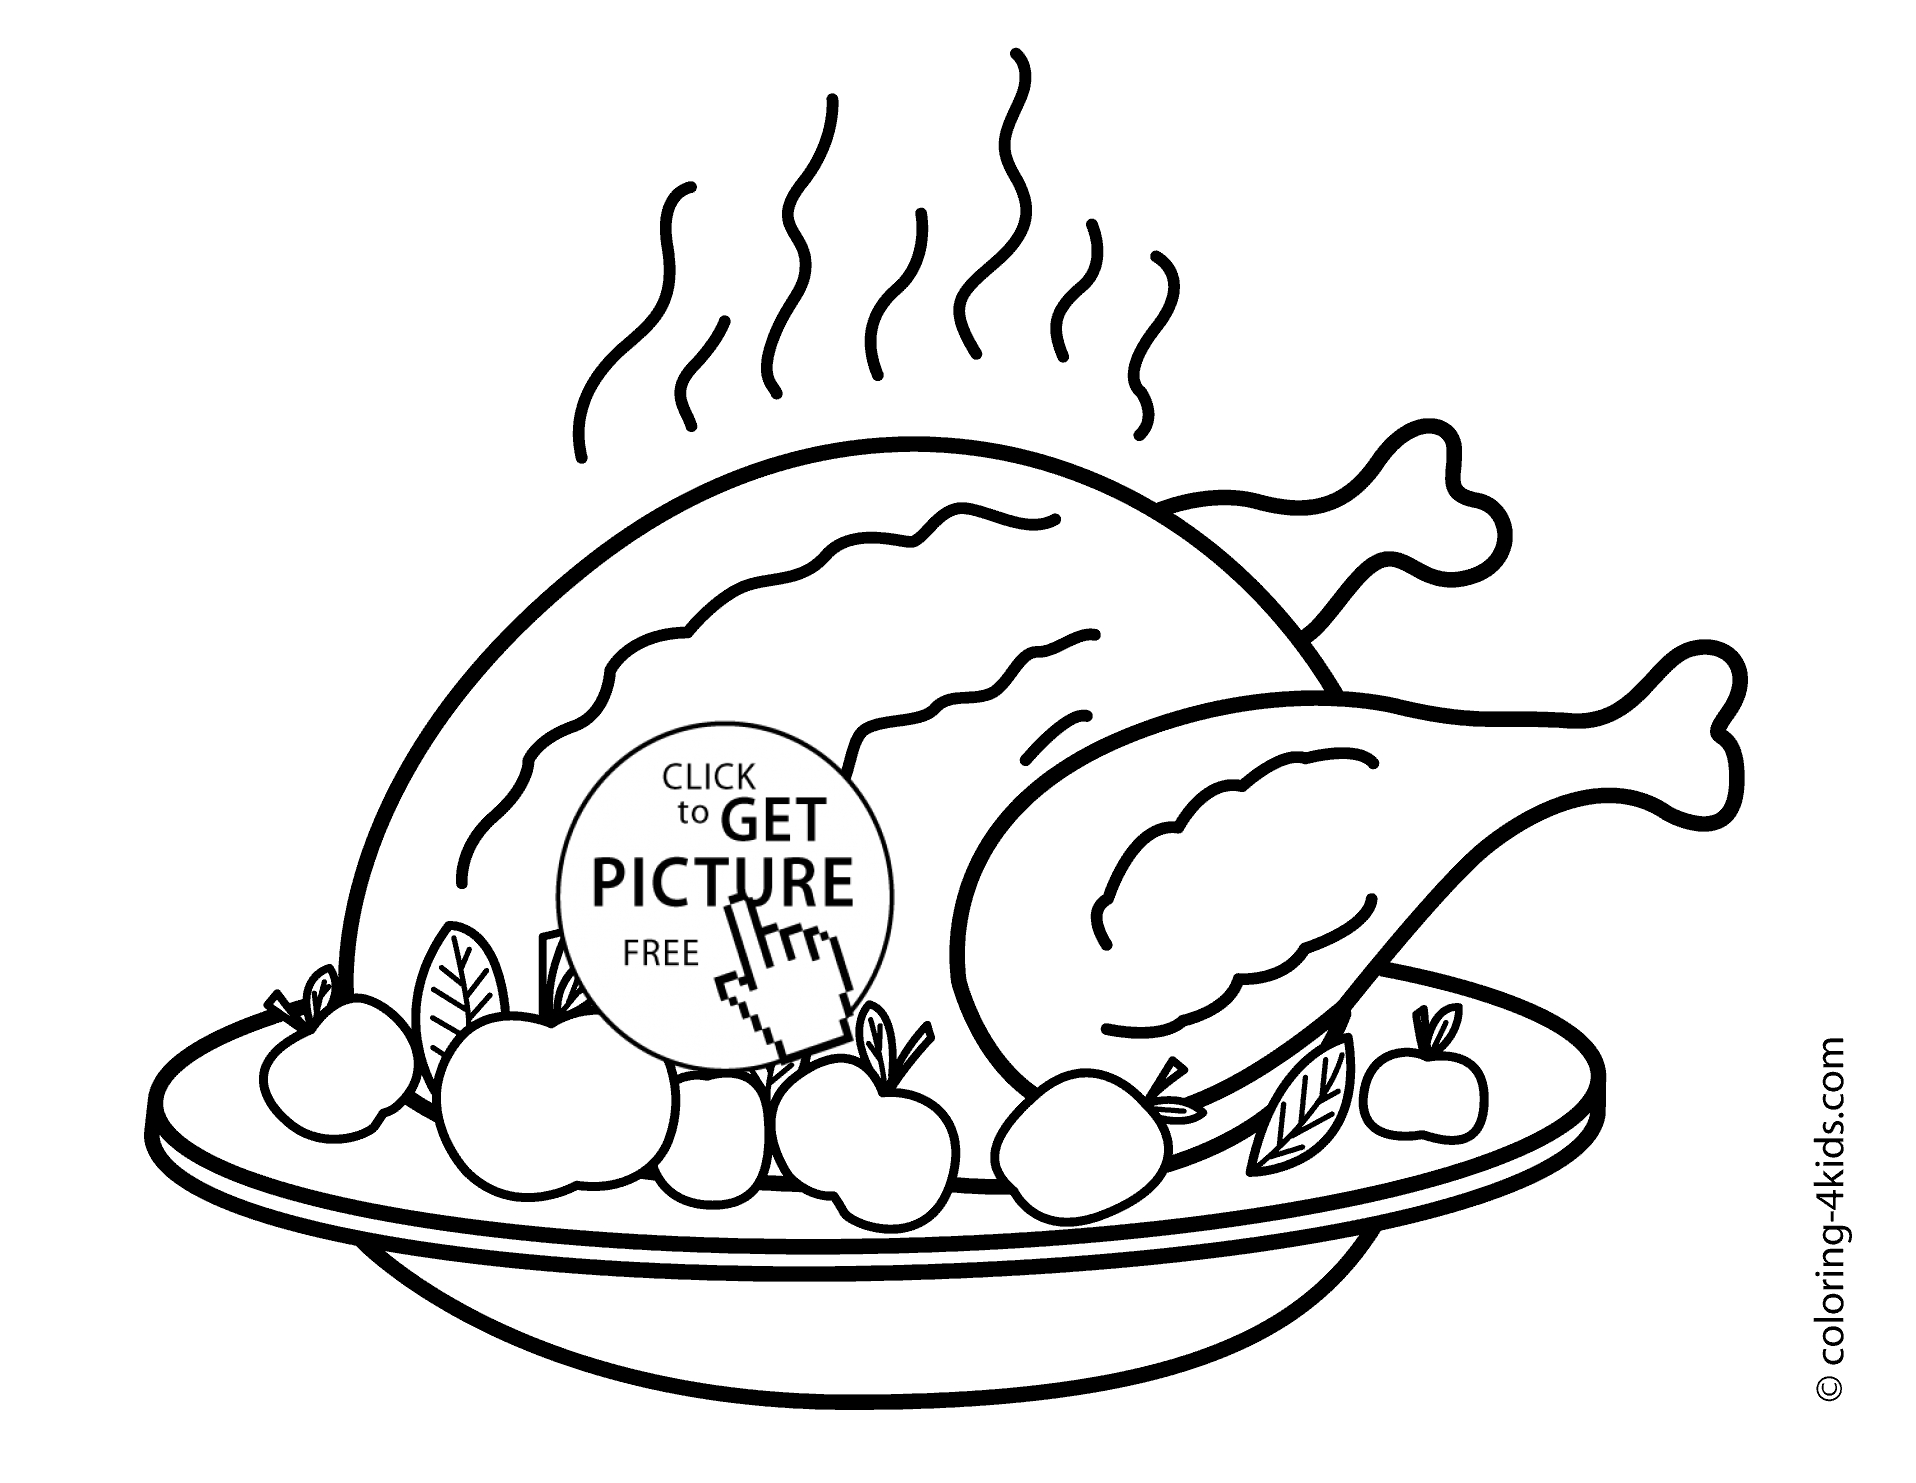 Thanksgiving Day Coloring Pages Free Coloring Ideas Thanksgiving Day Turkey Coloring Ideas Pages For